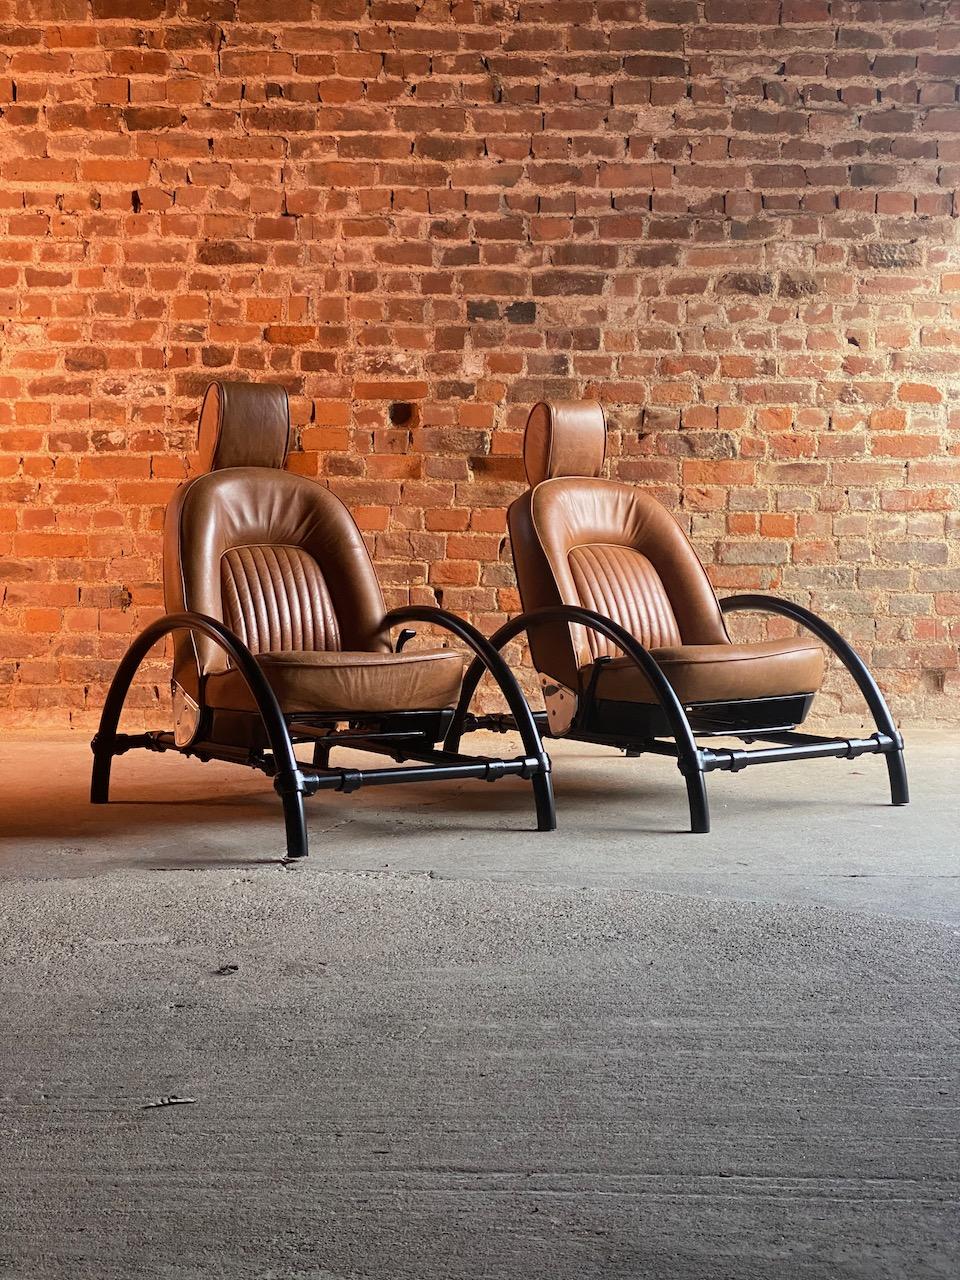 British Ron Arad Rover Chairs Pair by One Off Limited circa 1981 Set 2